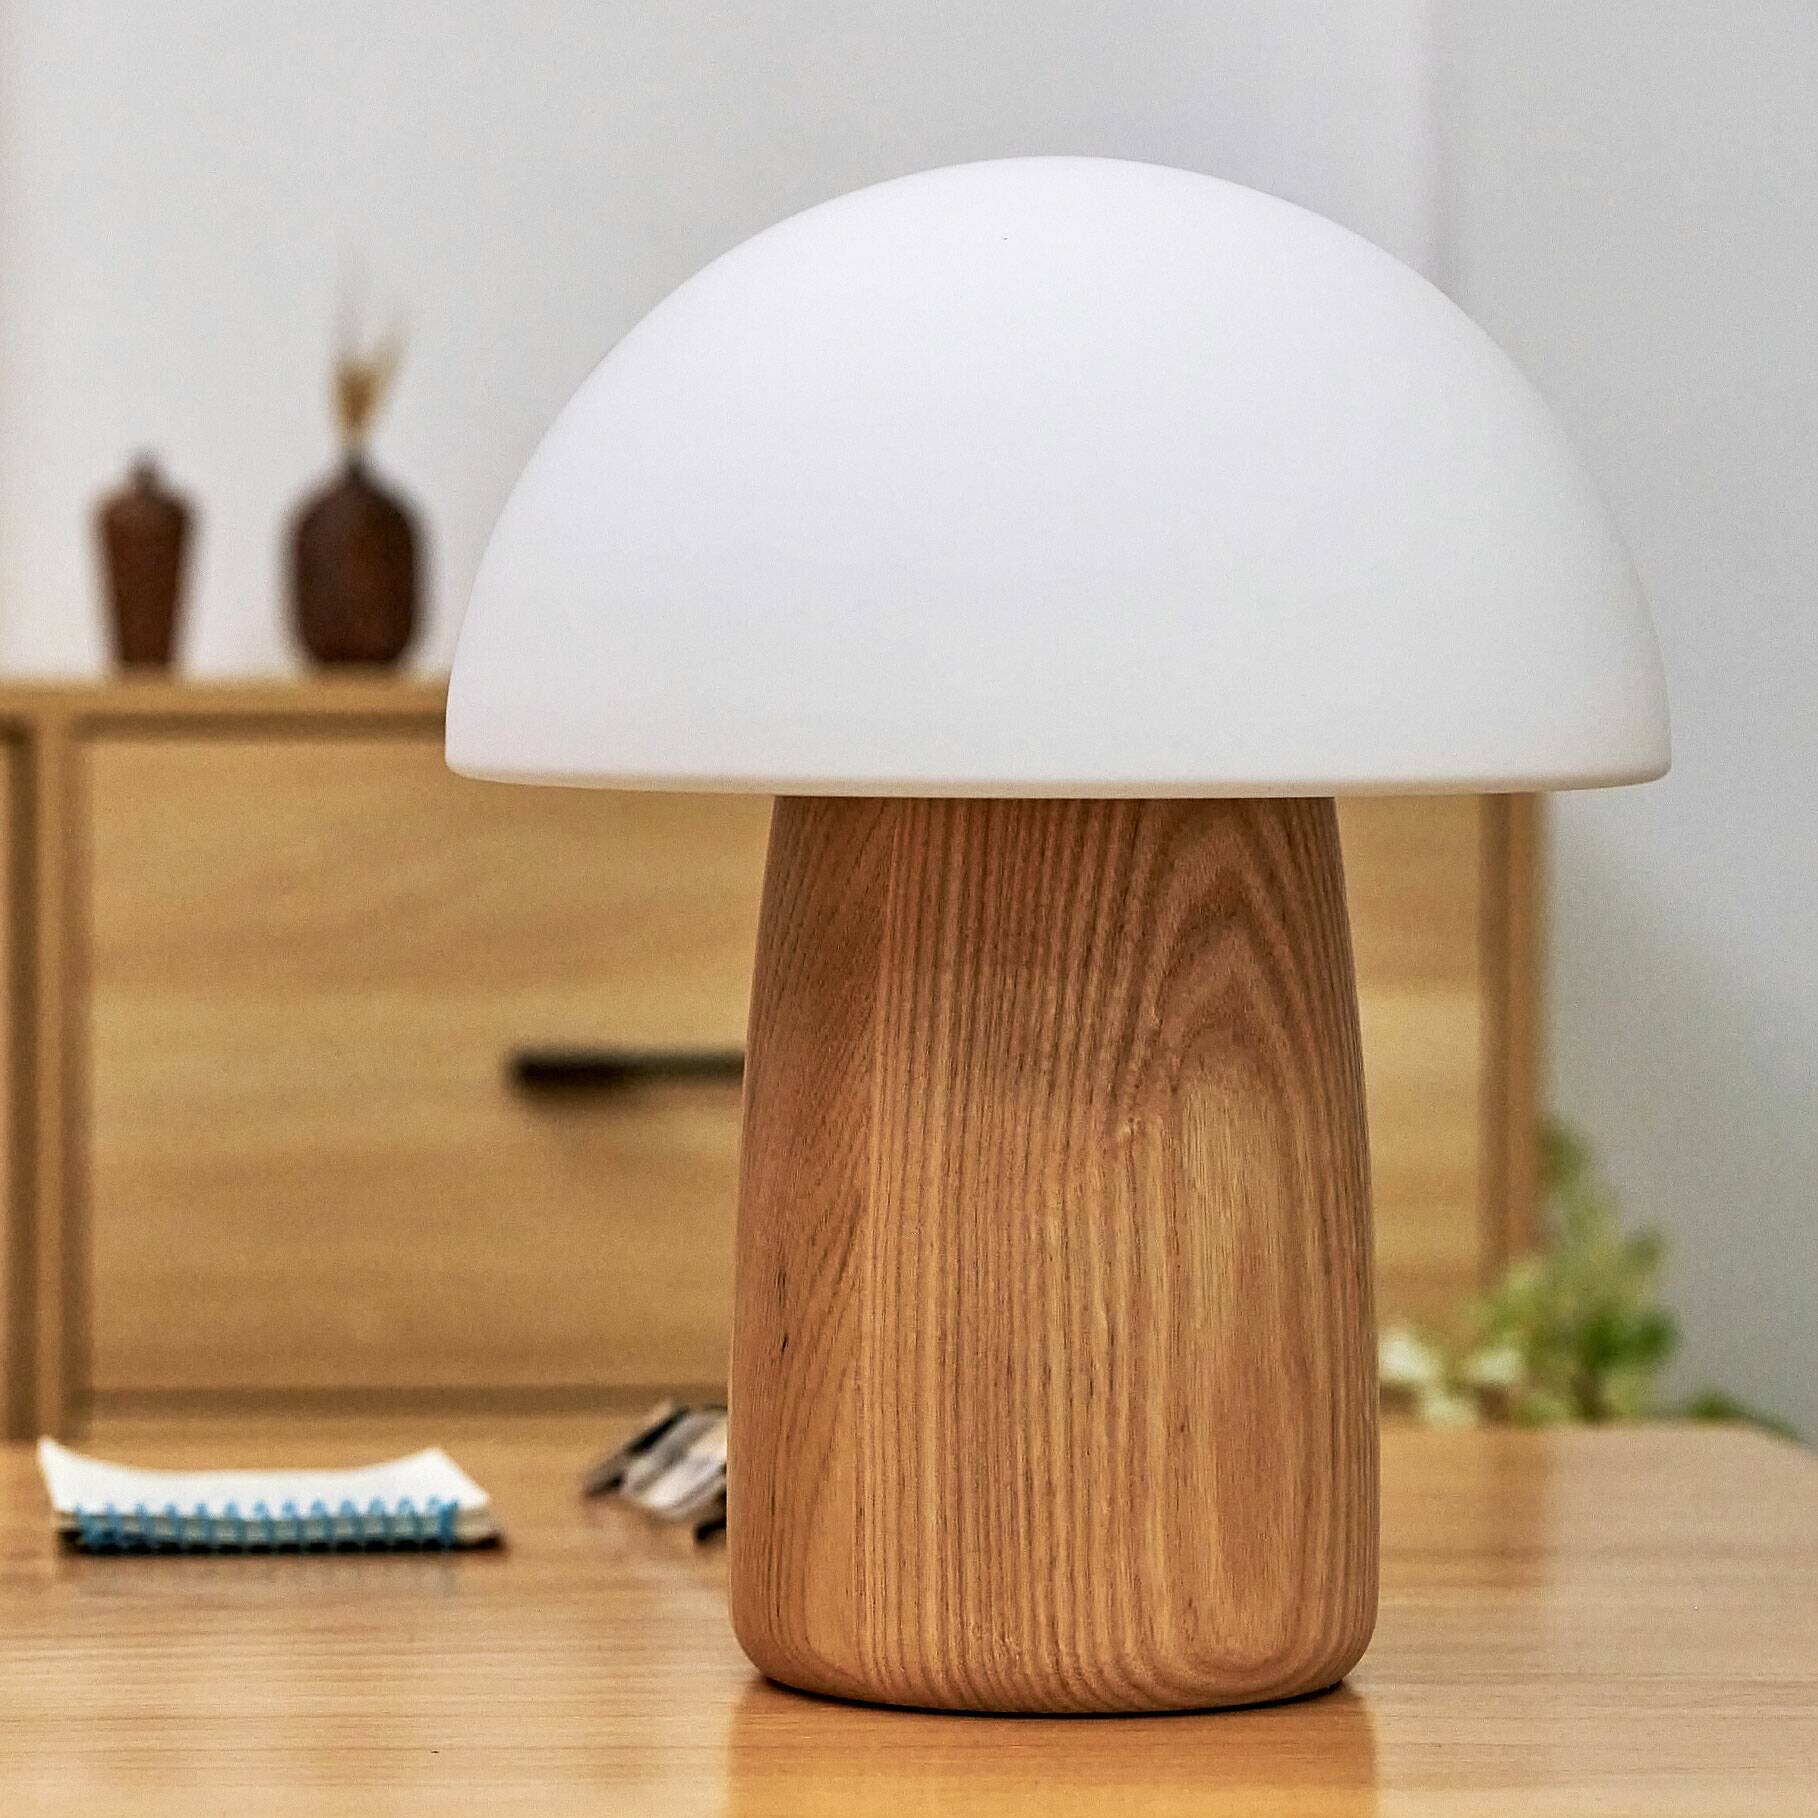 Read more about Graham and green walnut mushroom lamp